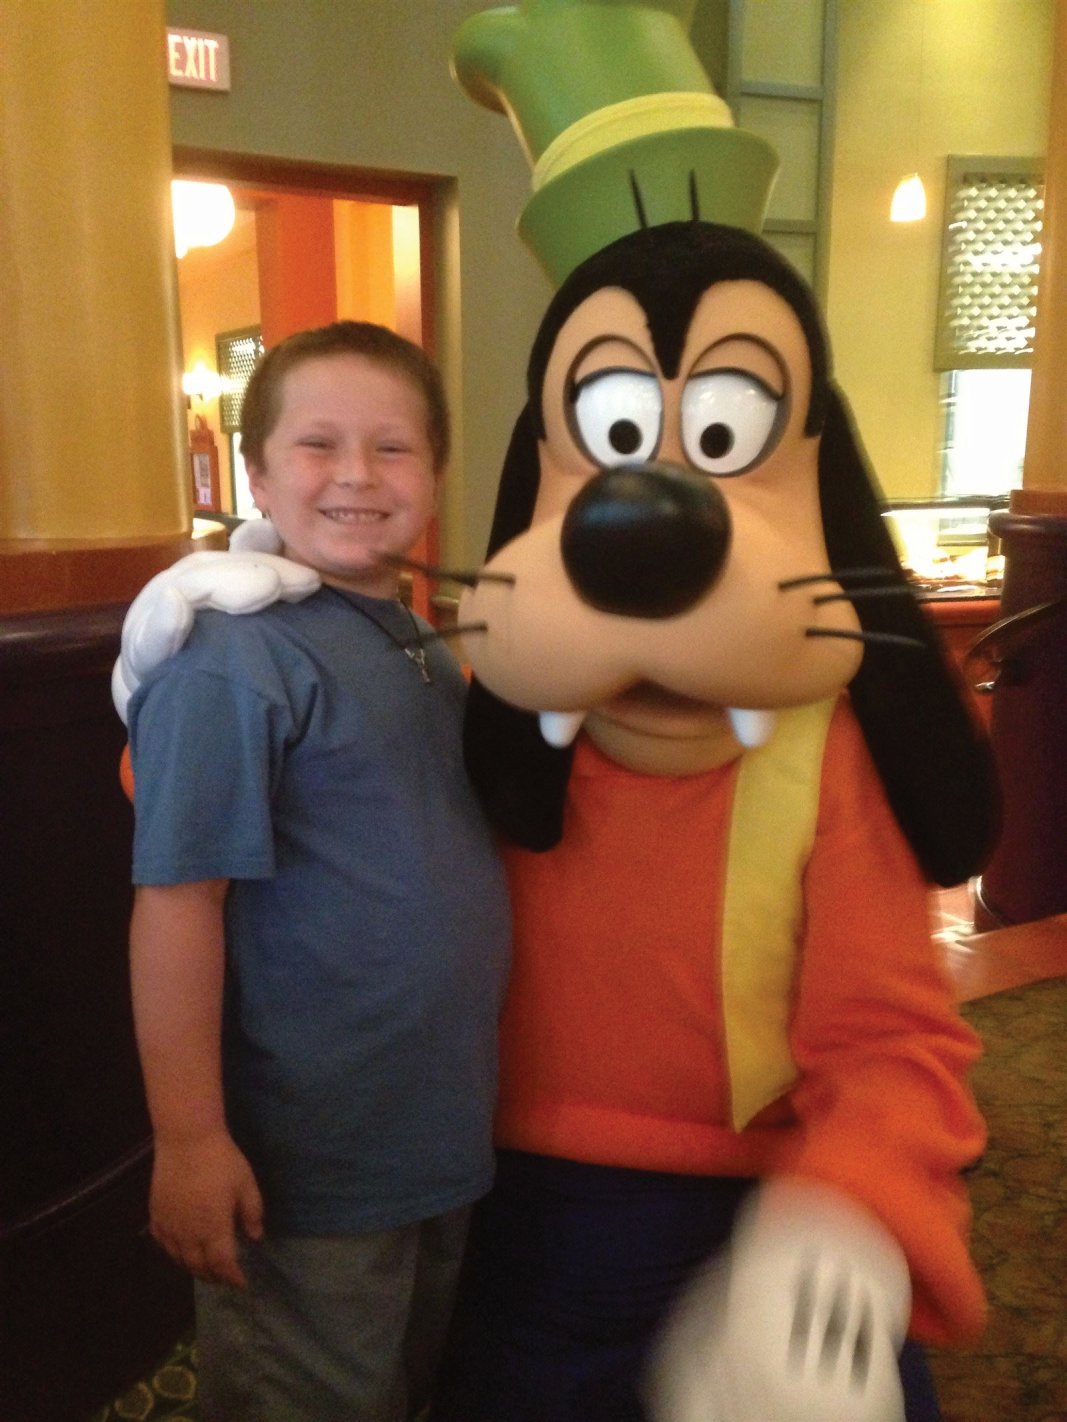 William and Pluto, a charter breakfast awaits your child at many Disney Resorts